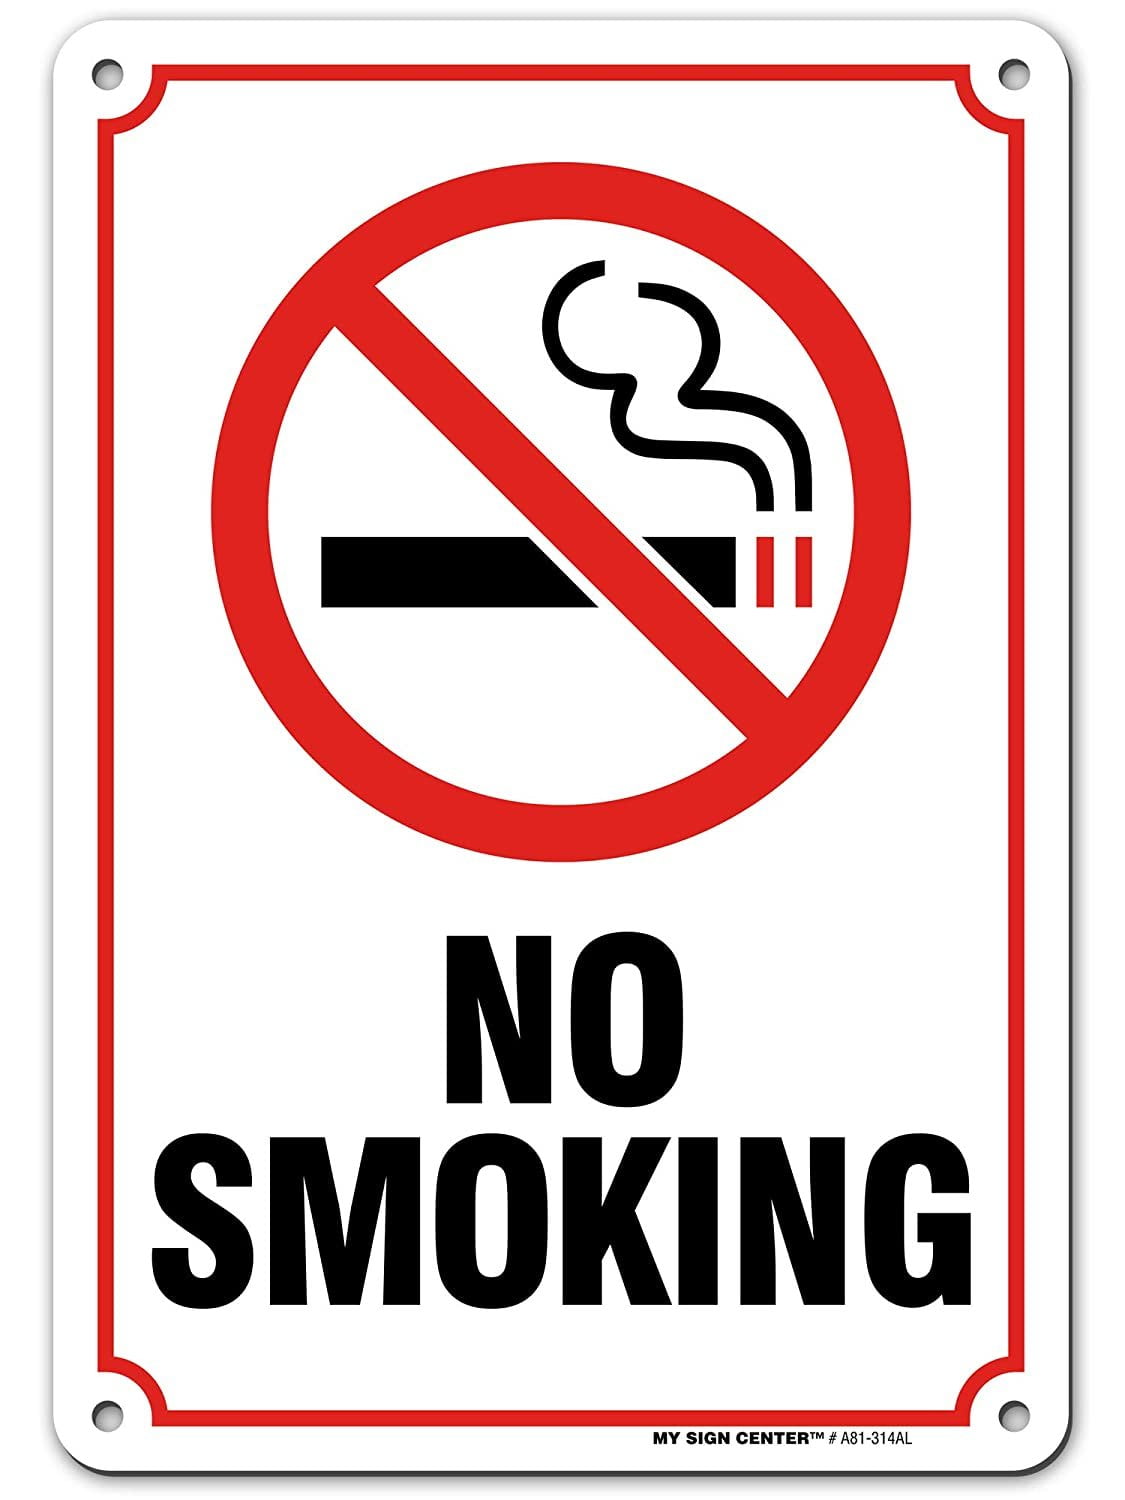 No Smoking STICKER or FLEXIBLE MAGNETIC SIGN magnet prohibited smoke 7.5x10.75" 